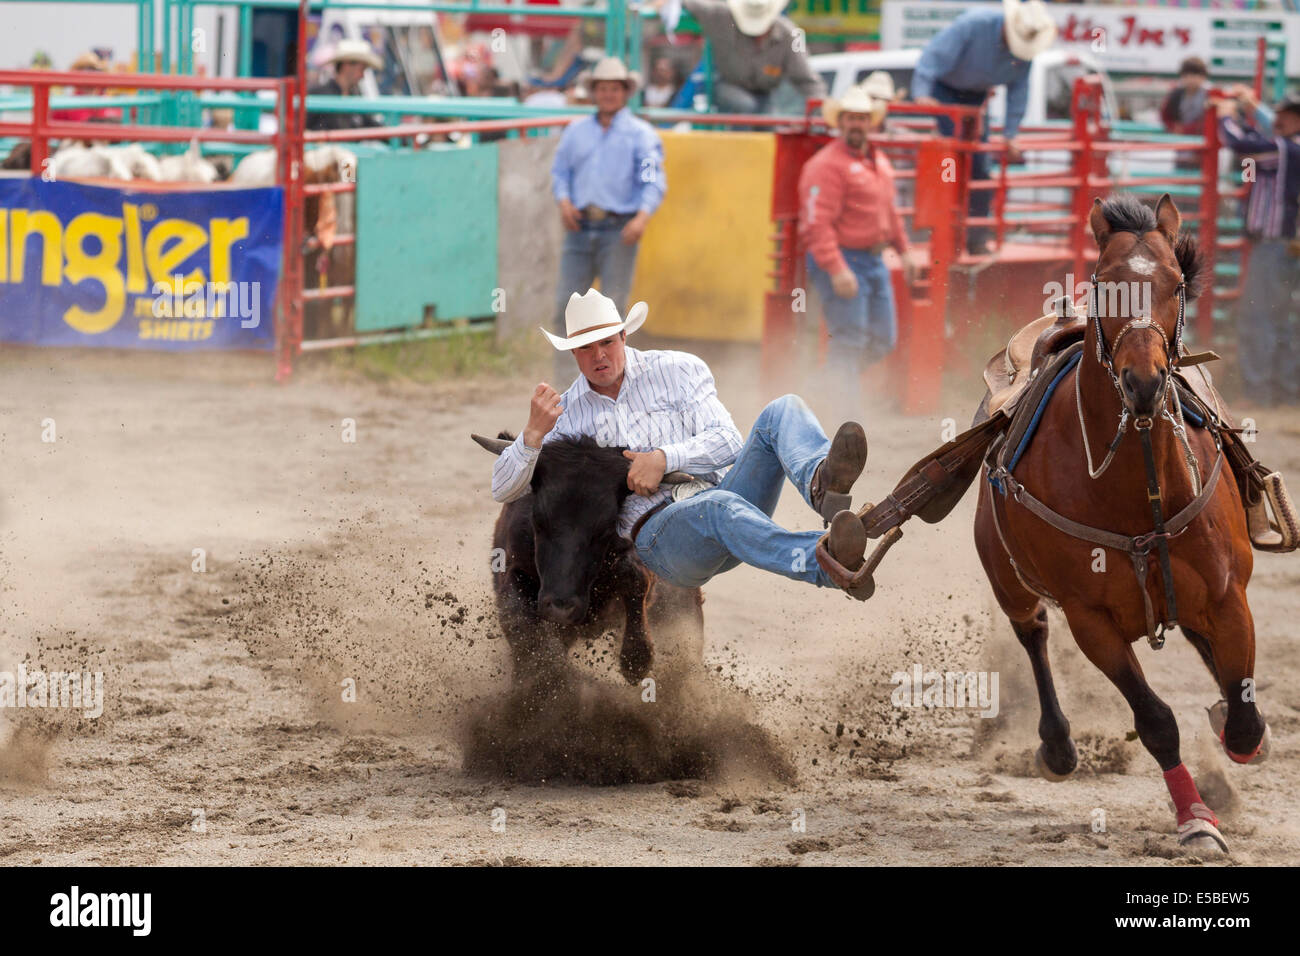 Cowboy in steer wrestling event at Luxton Pro Rodeo events-Metchosin, British Columbia, Canada. Stock Photo